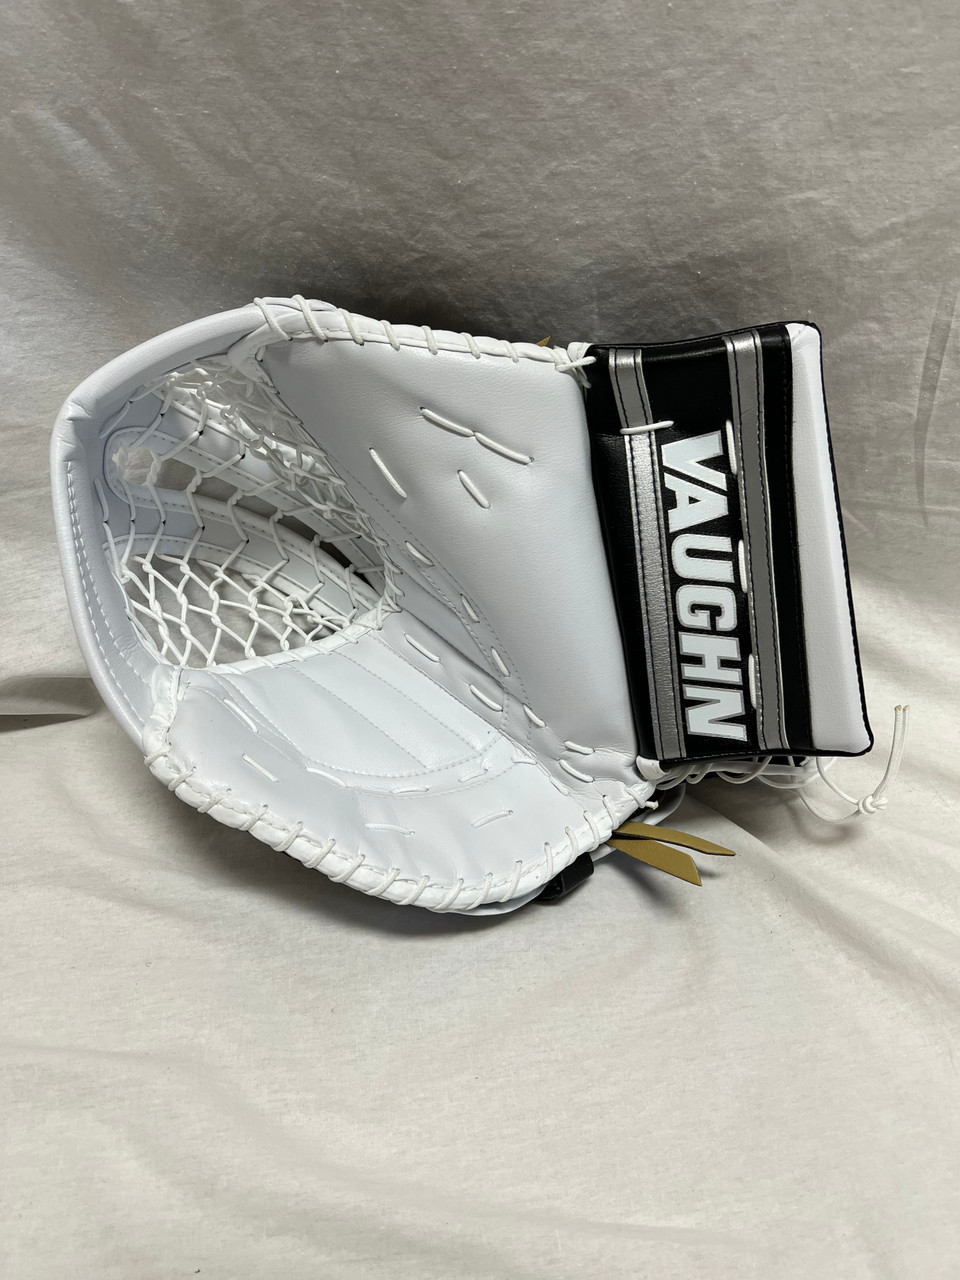 pro stock goalie products for sale